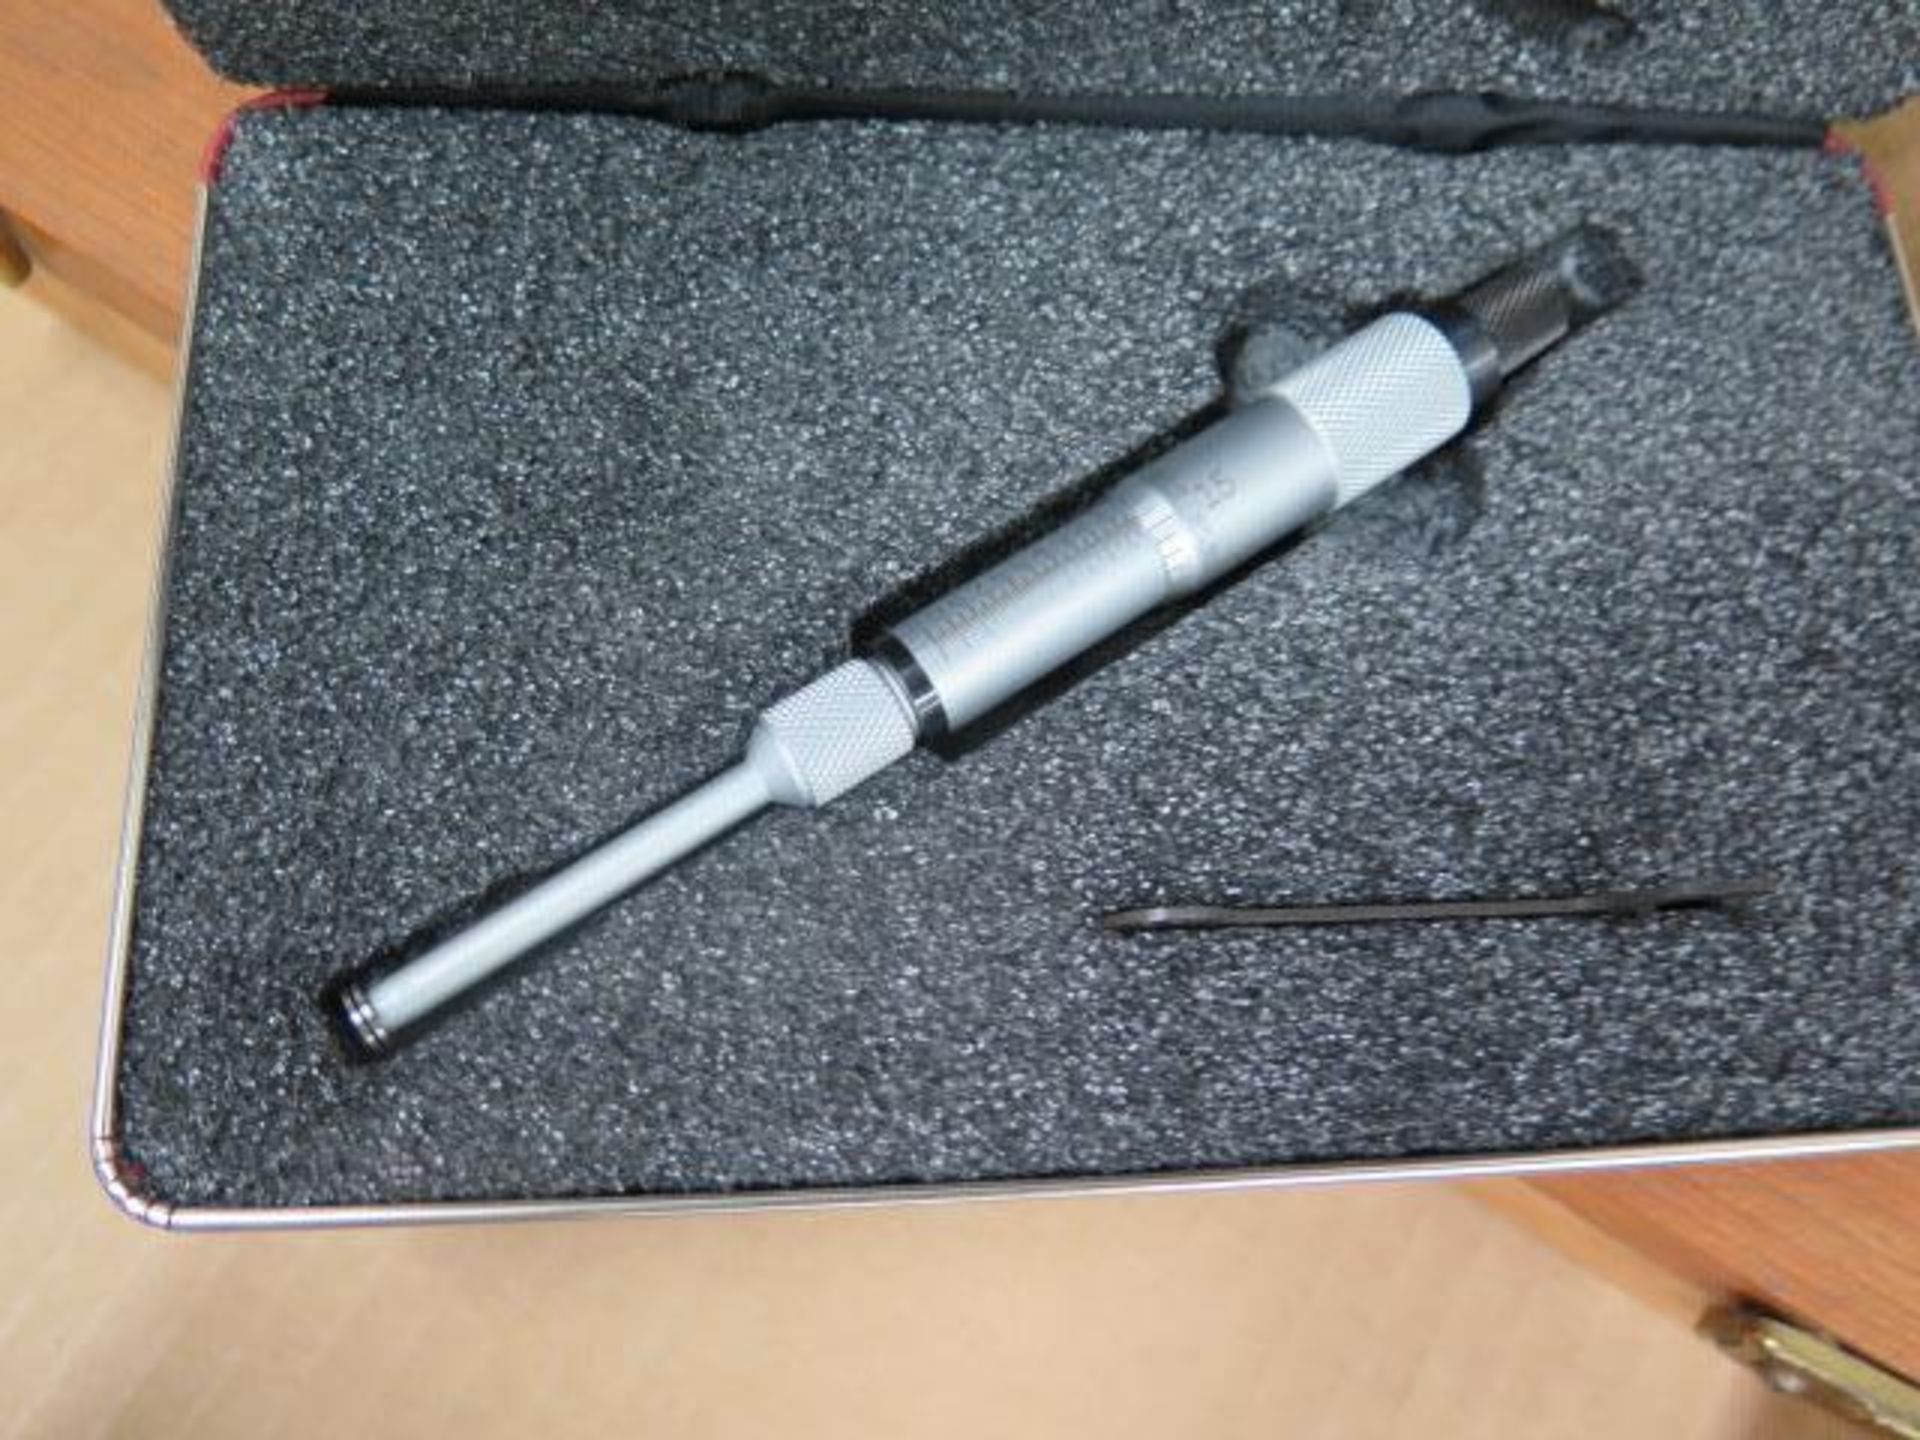 Starrett 0-1" Step Mic and Scherr Tumico 0-6" Depth Mic (SOLD AS-IS - NO WARRANTY) - Image 3 of 3